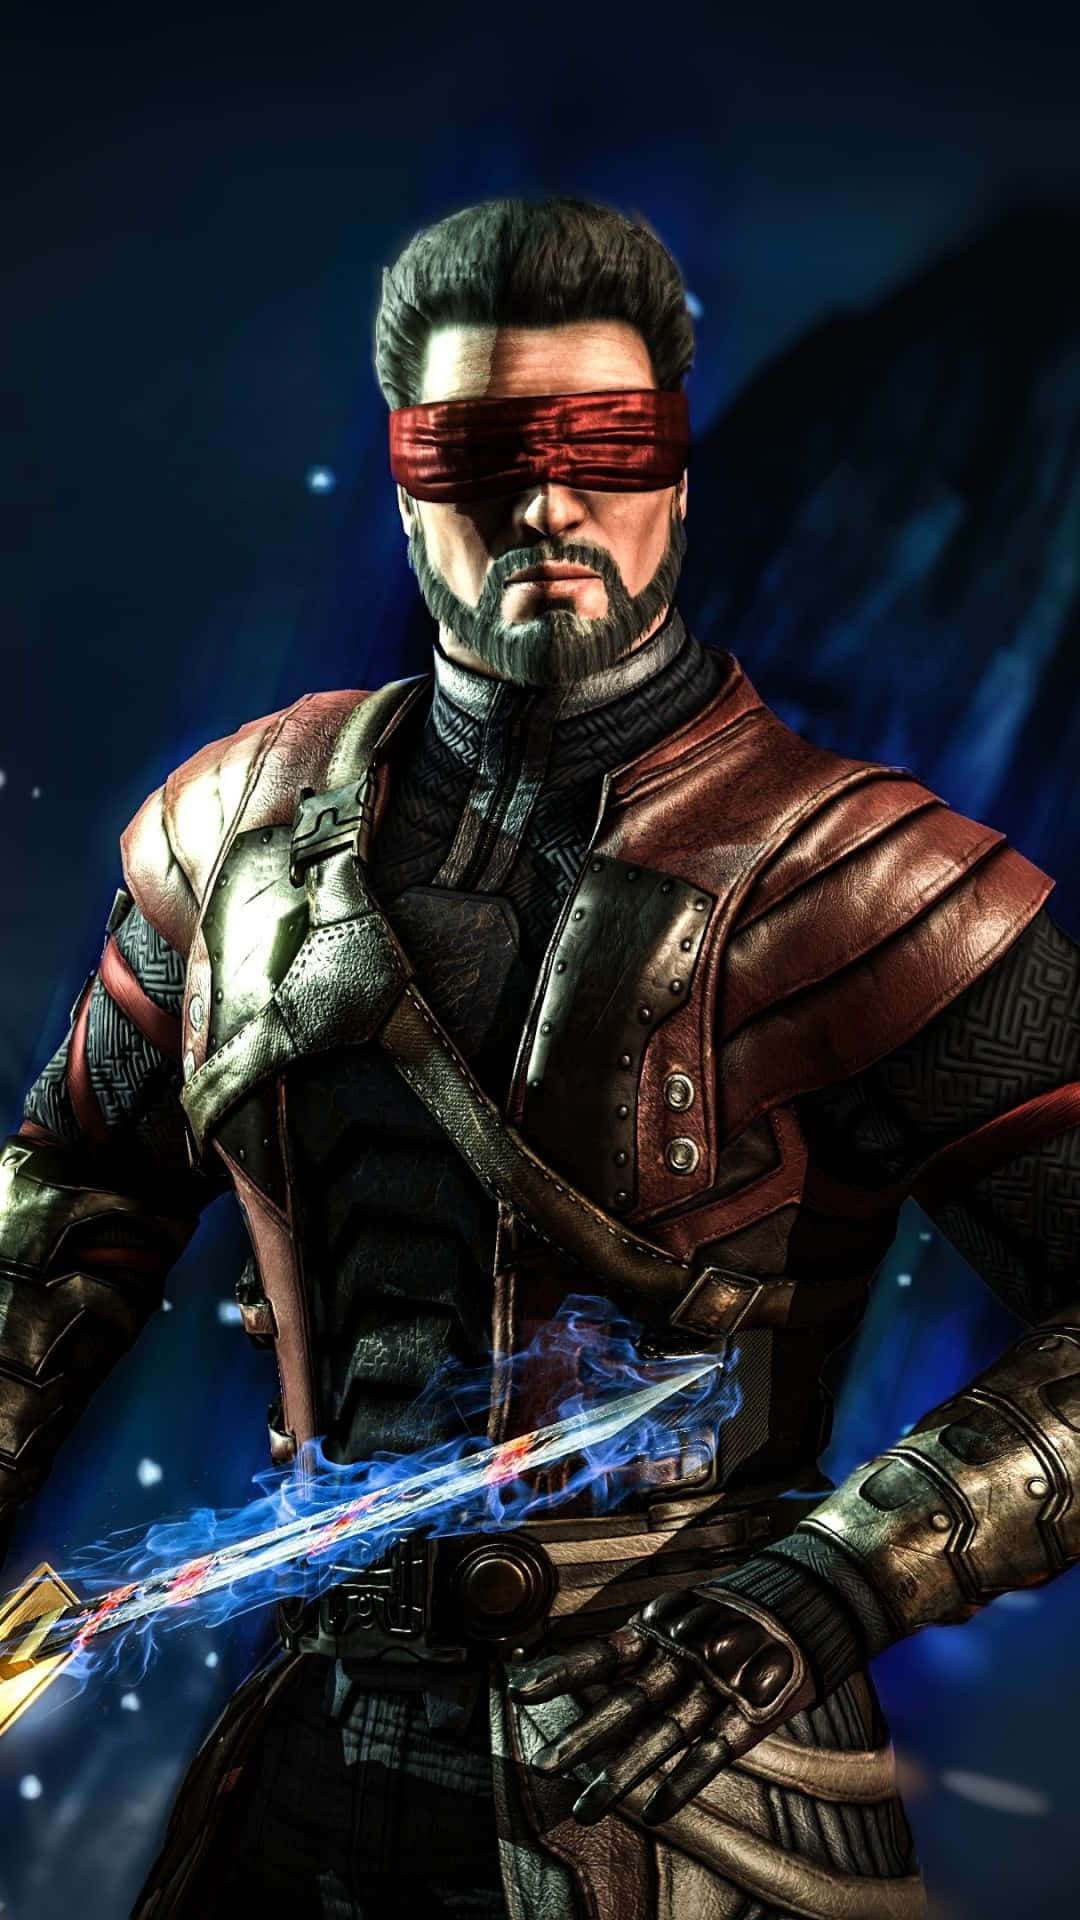 Experience Gaming Entertainment on An Immersive Level with Mortal Kombat on IPhone Wallpaper